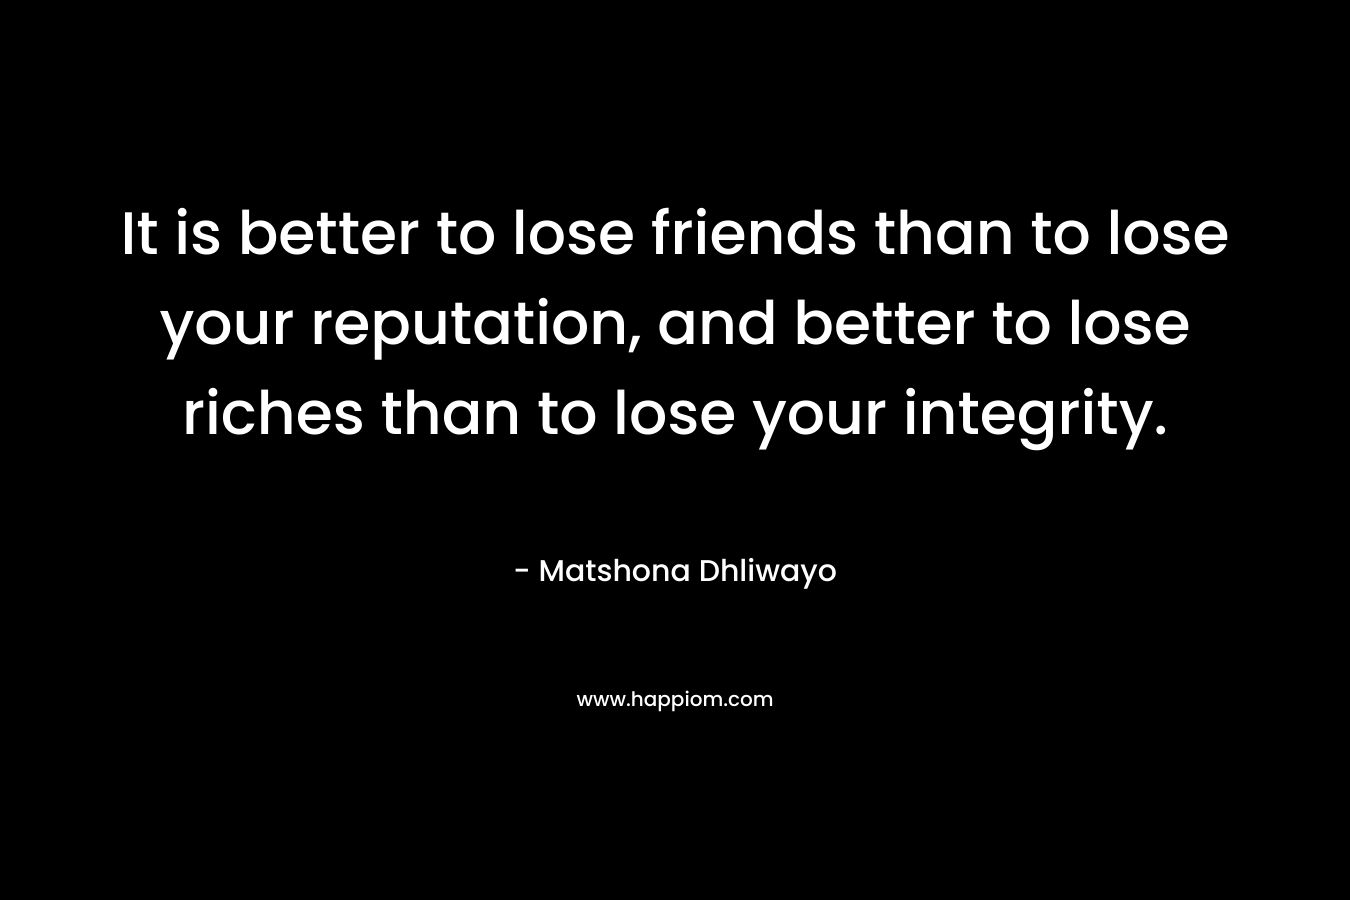 It is better to lose friends than to lose your reputation, and better to lose riches than to lose your integrity.